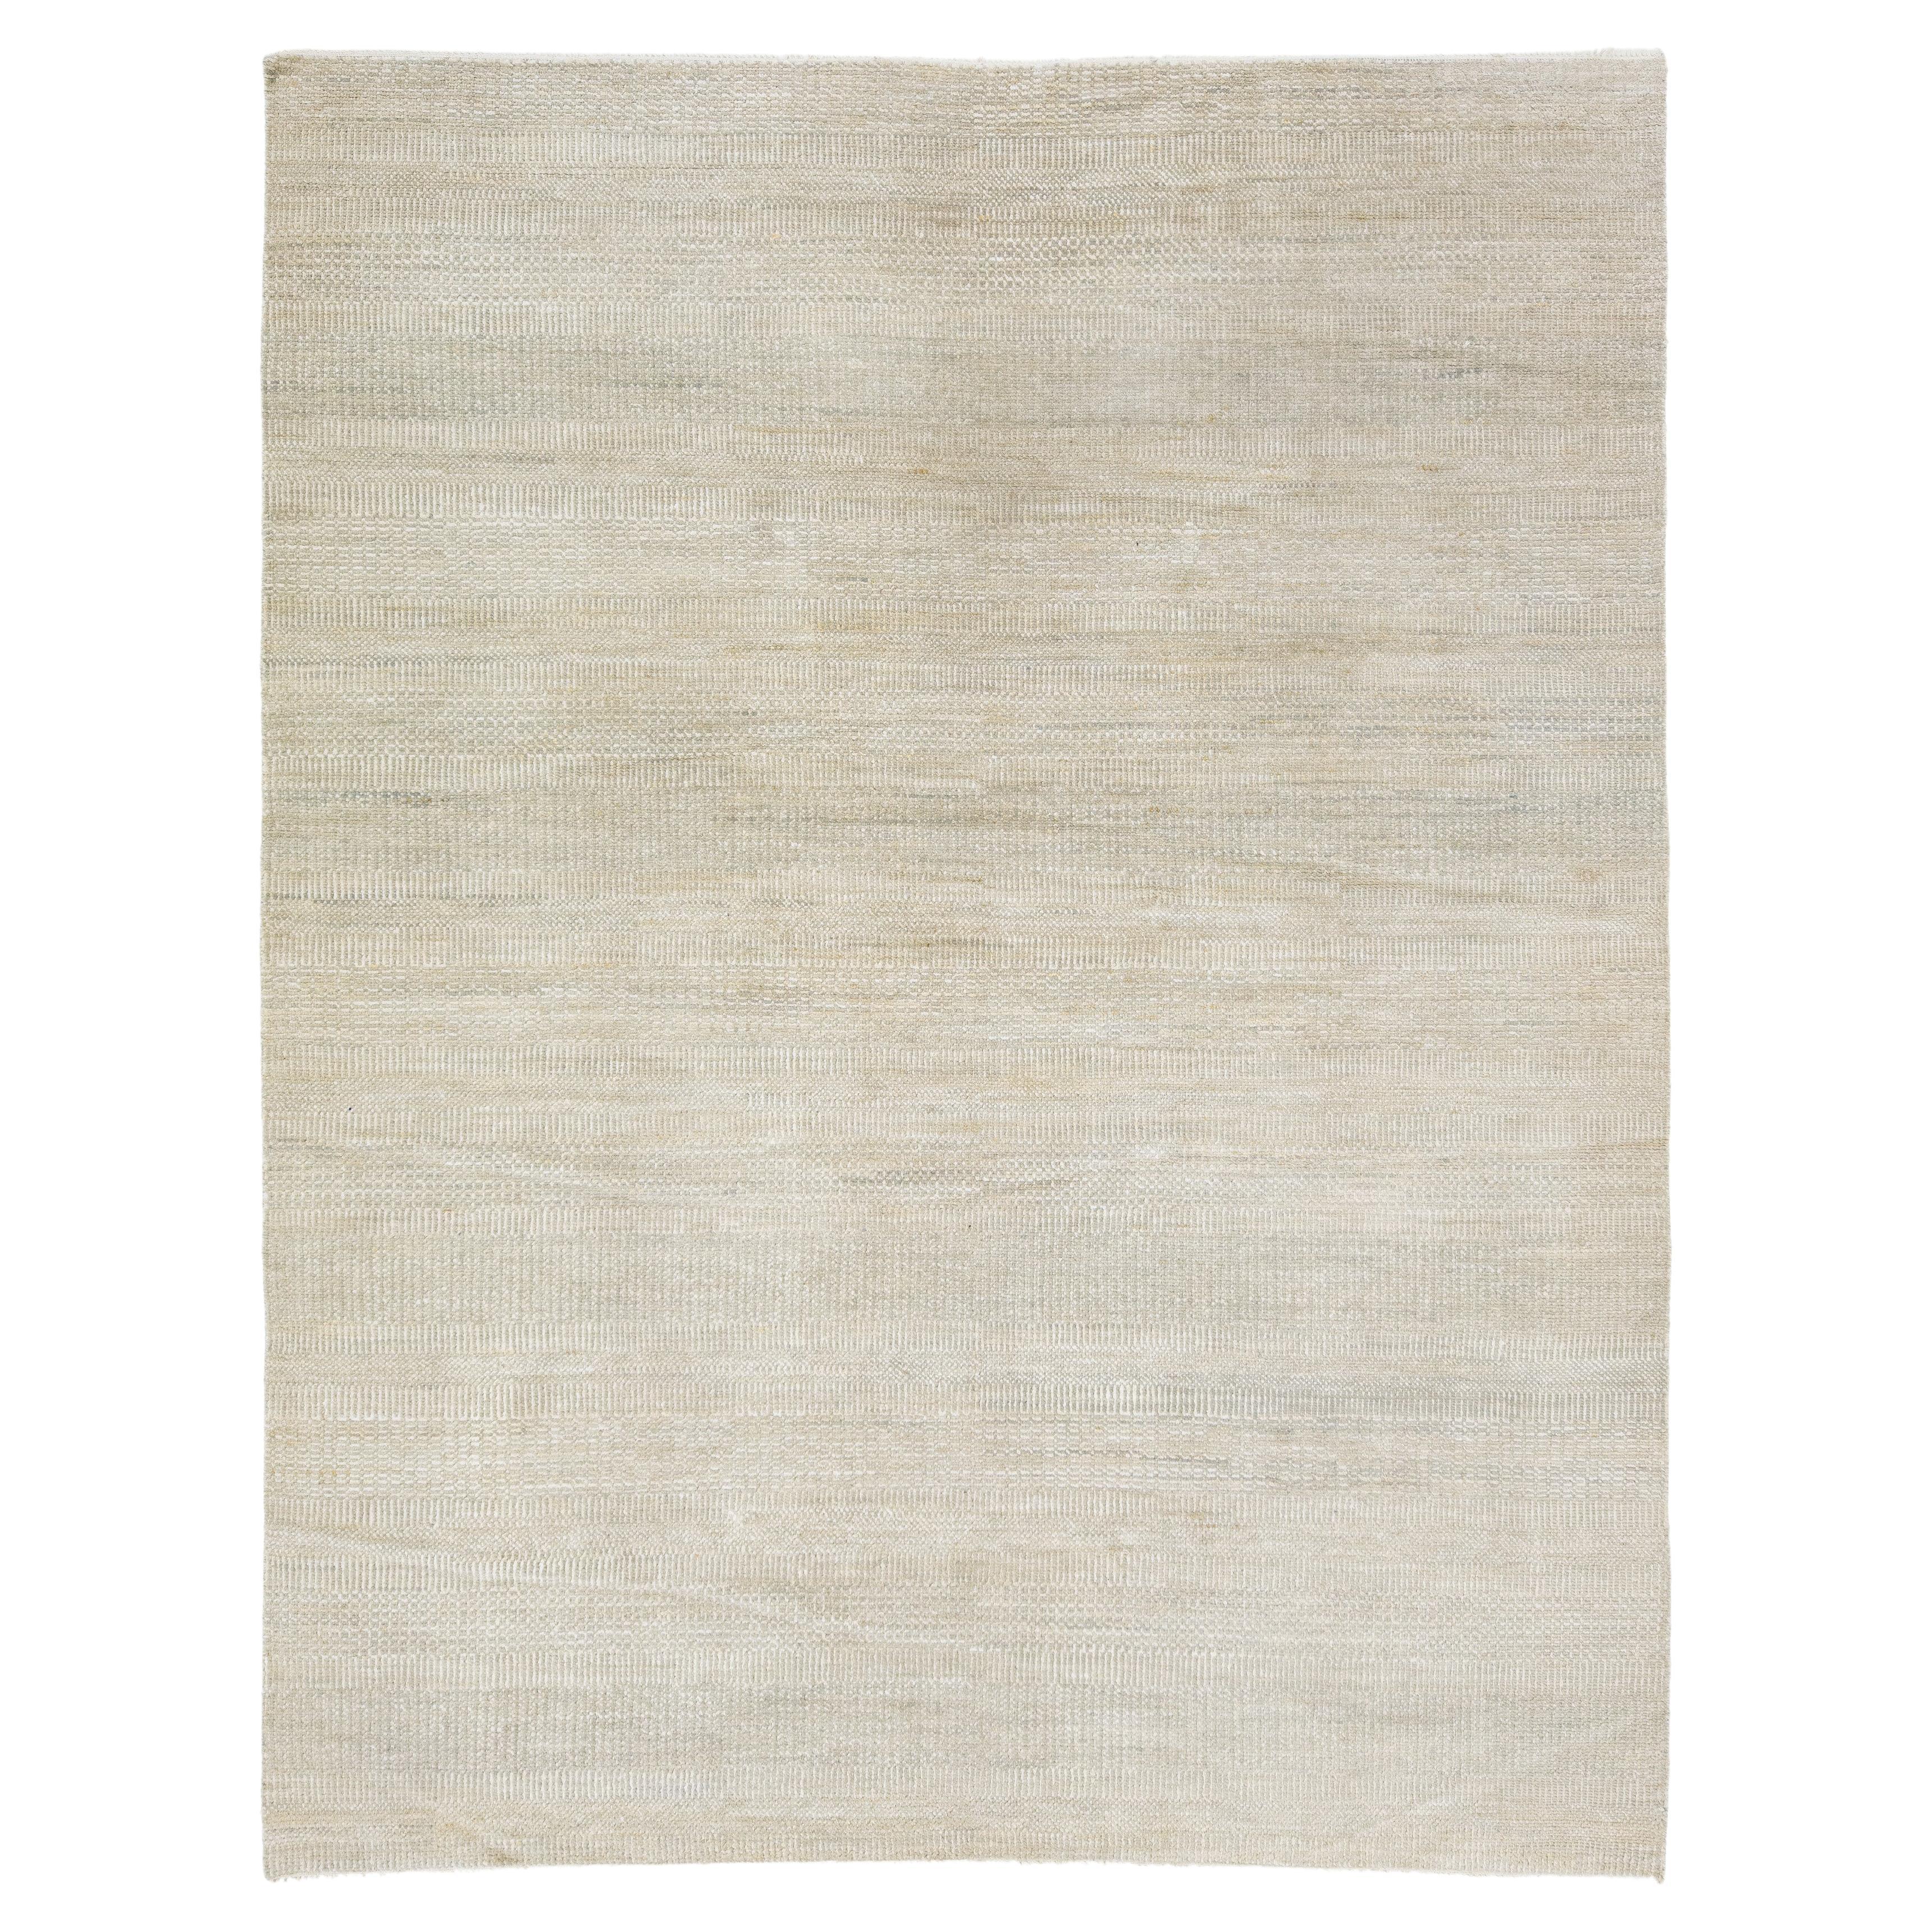 Minimalist Handmade Room Size Wool Rug In Beige and Gray For Sale